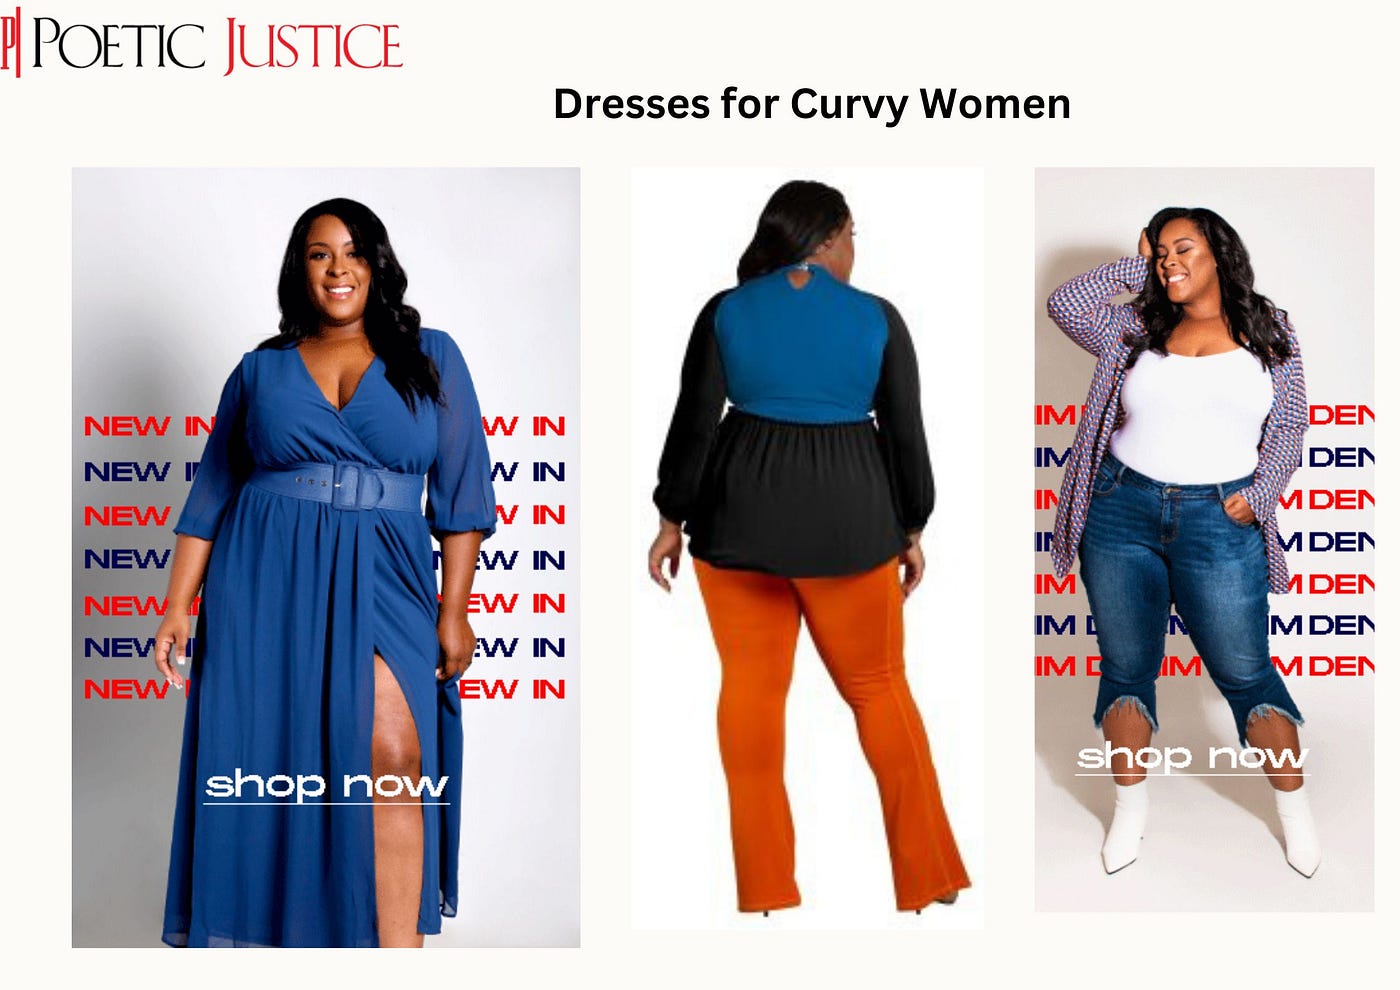 Dresses for Curvy Women: Elegant Ways To Style!, by PJ Poetic Justice  Jeans